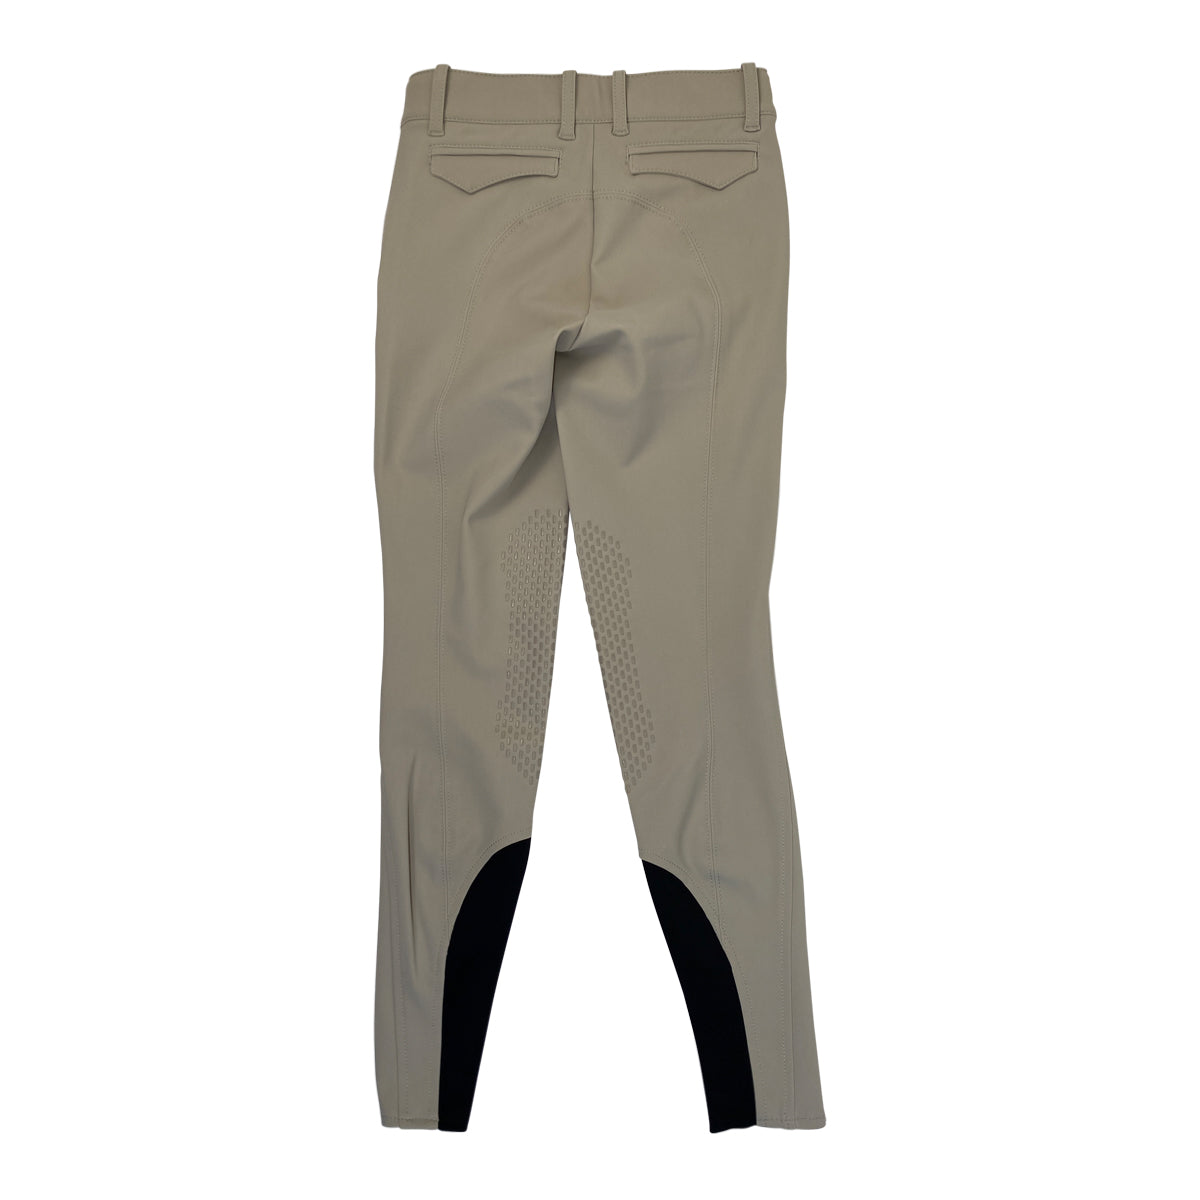 Equiline 'Brendak' Knee Patch Breeches in Tan